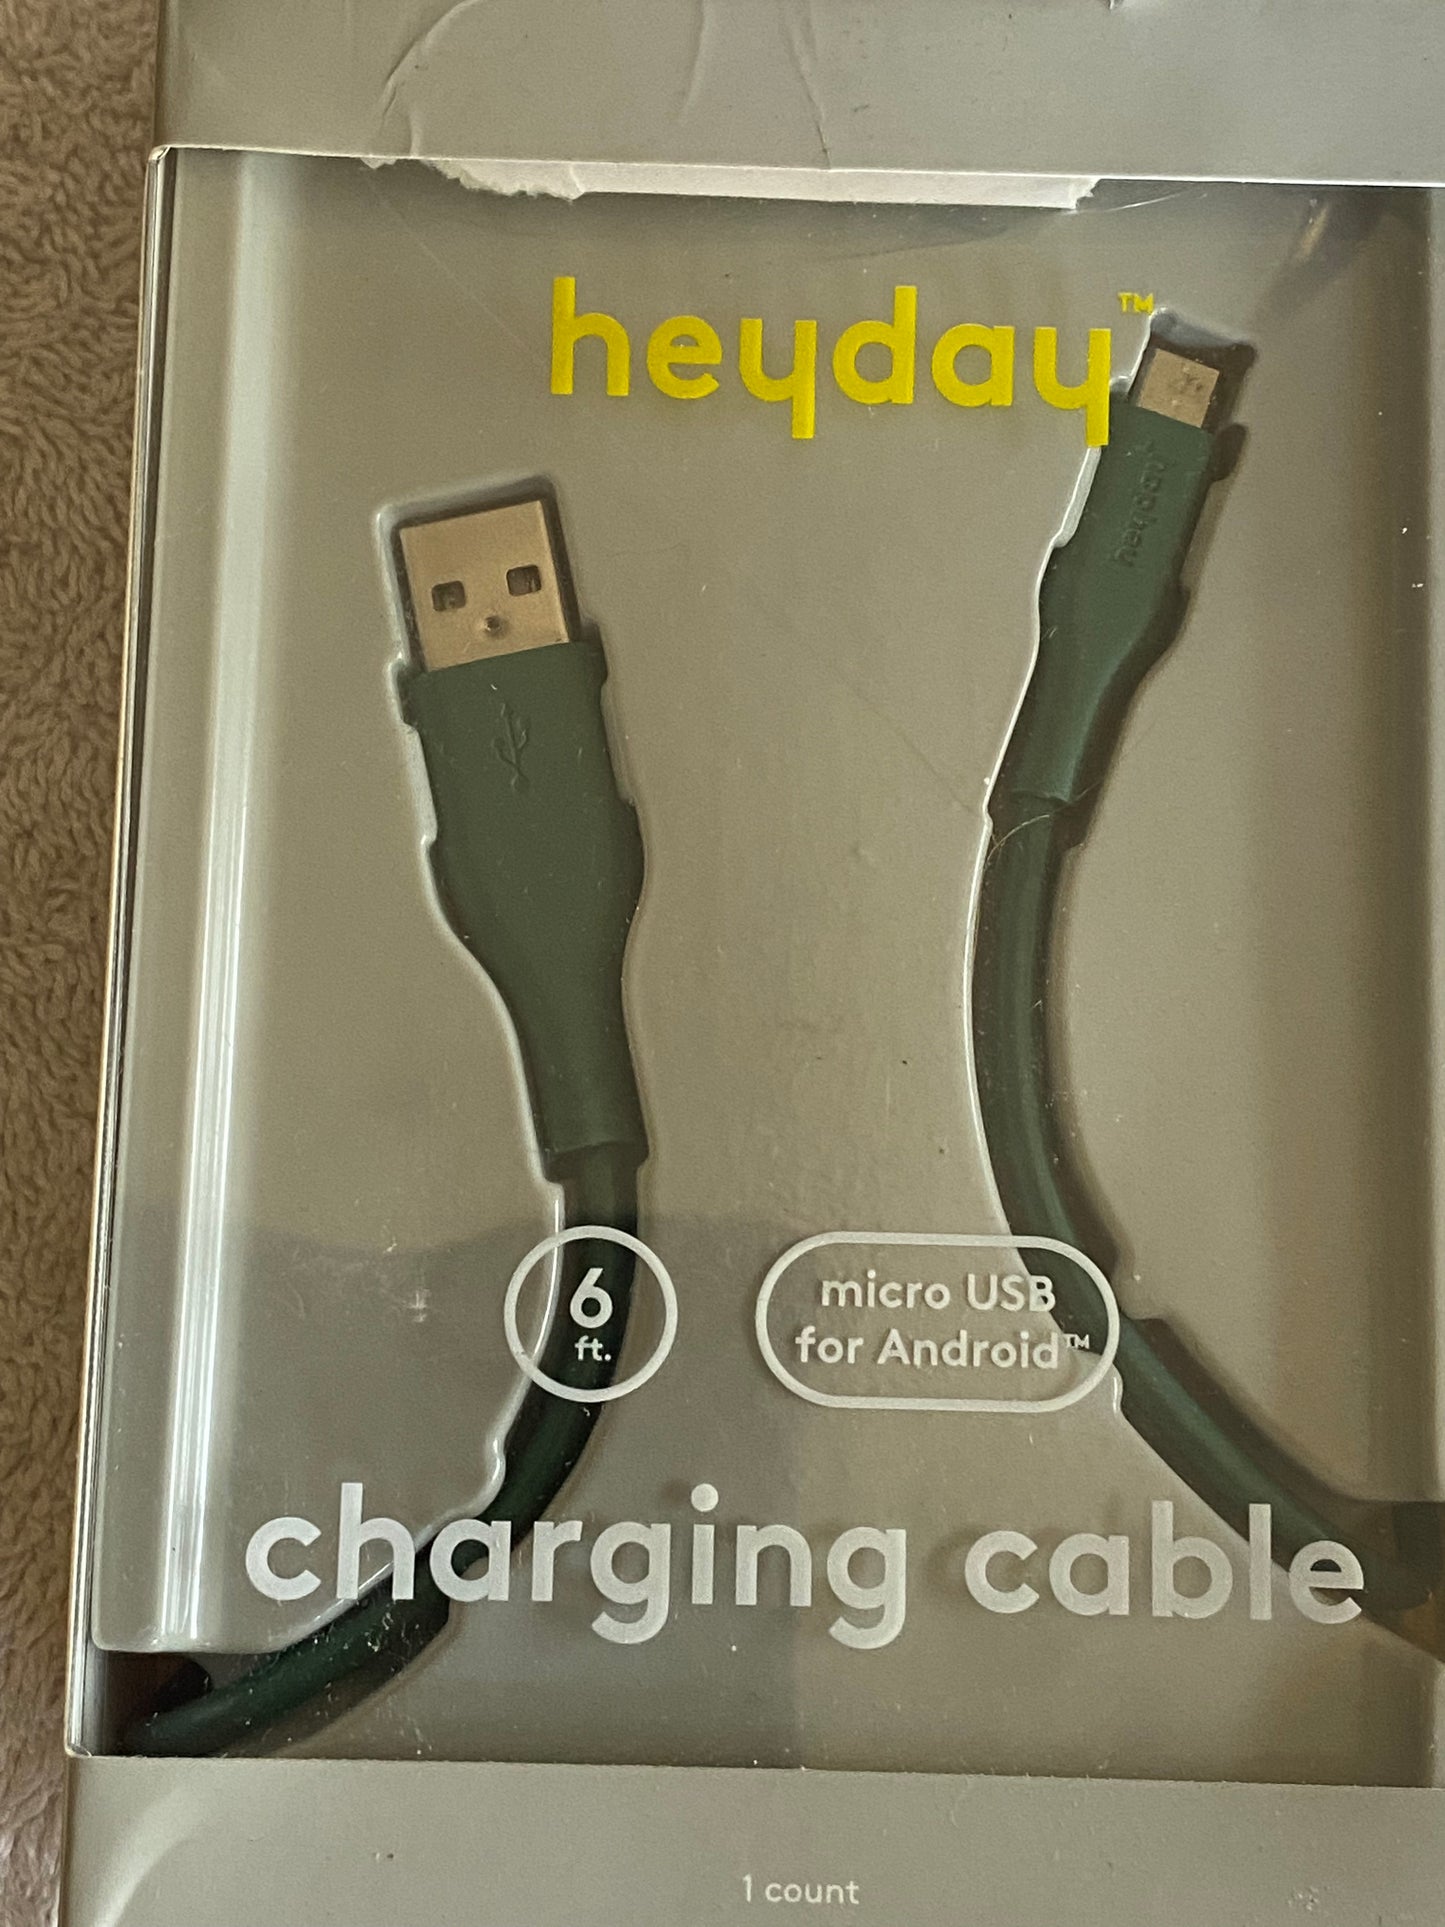 heyday 6 Feet Micro USB for Android Universal Charging cable - Open Box Green